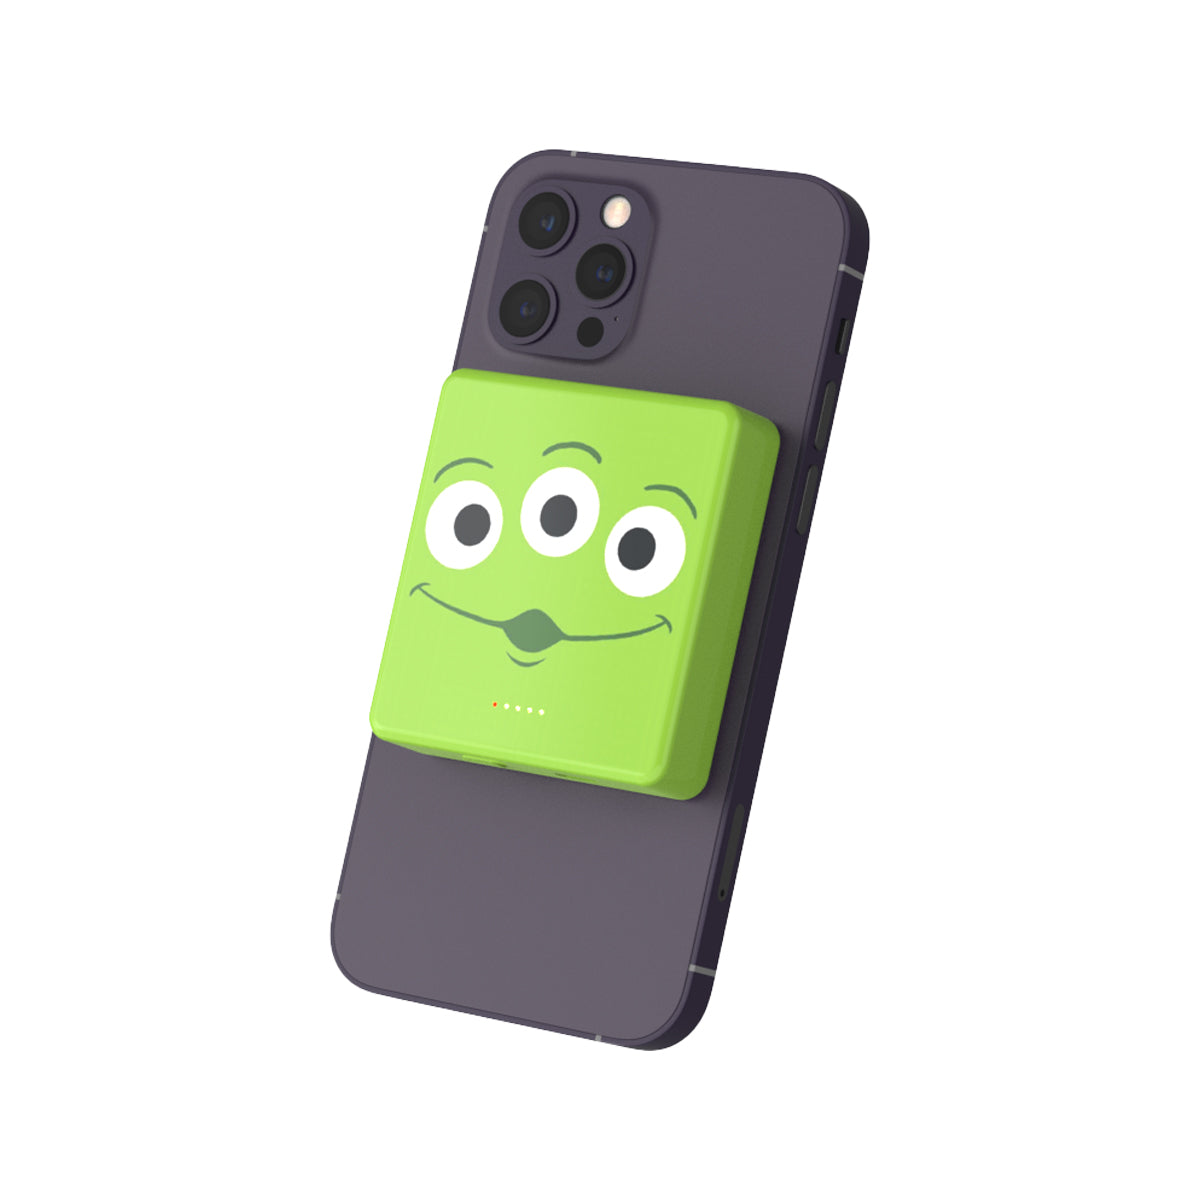 【LIMITED EDITION】Toy Story Magnetic Wireless Powerbank - Aliens